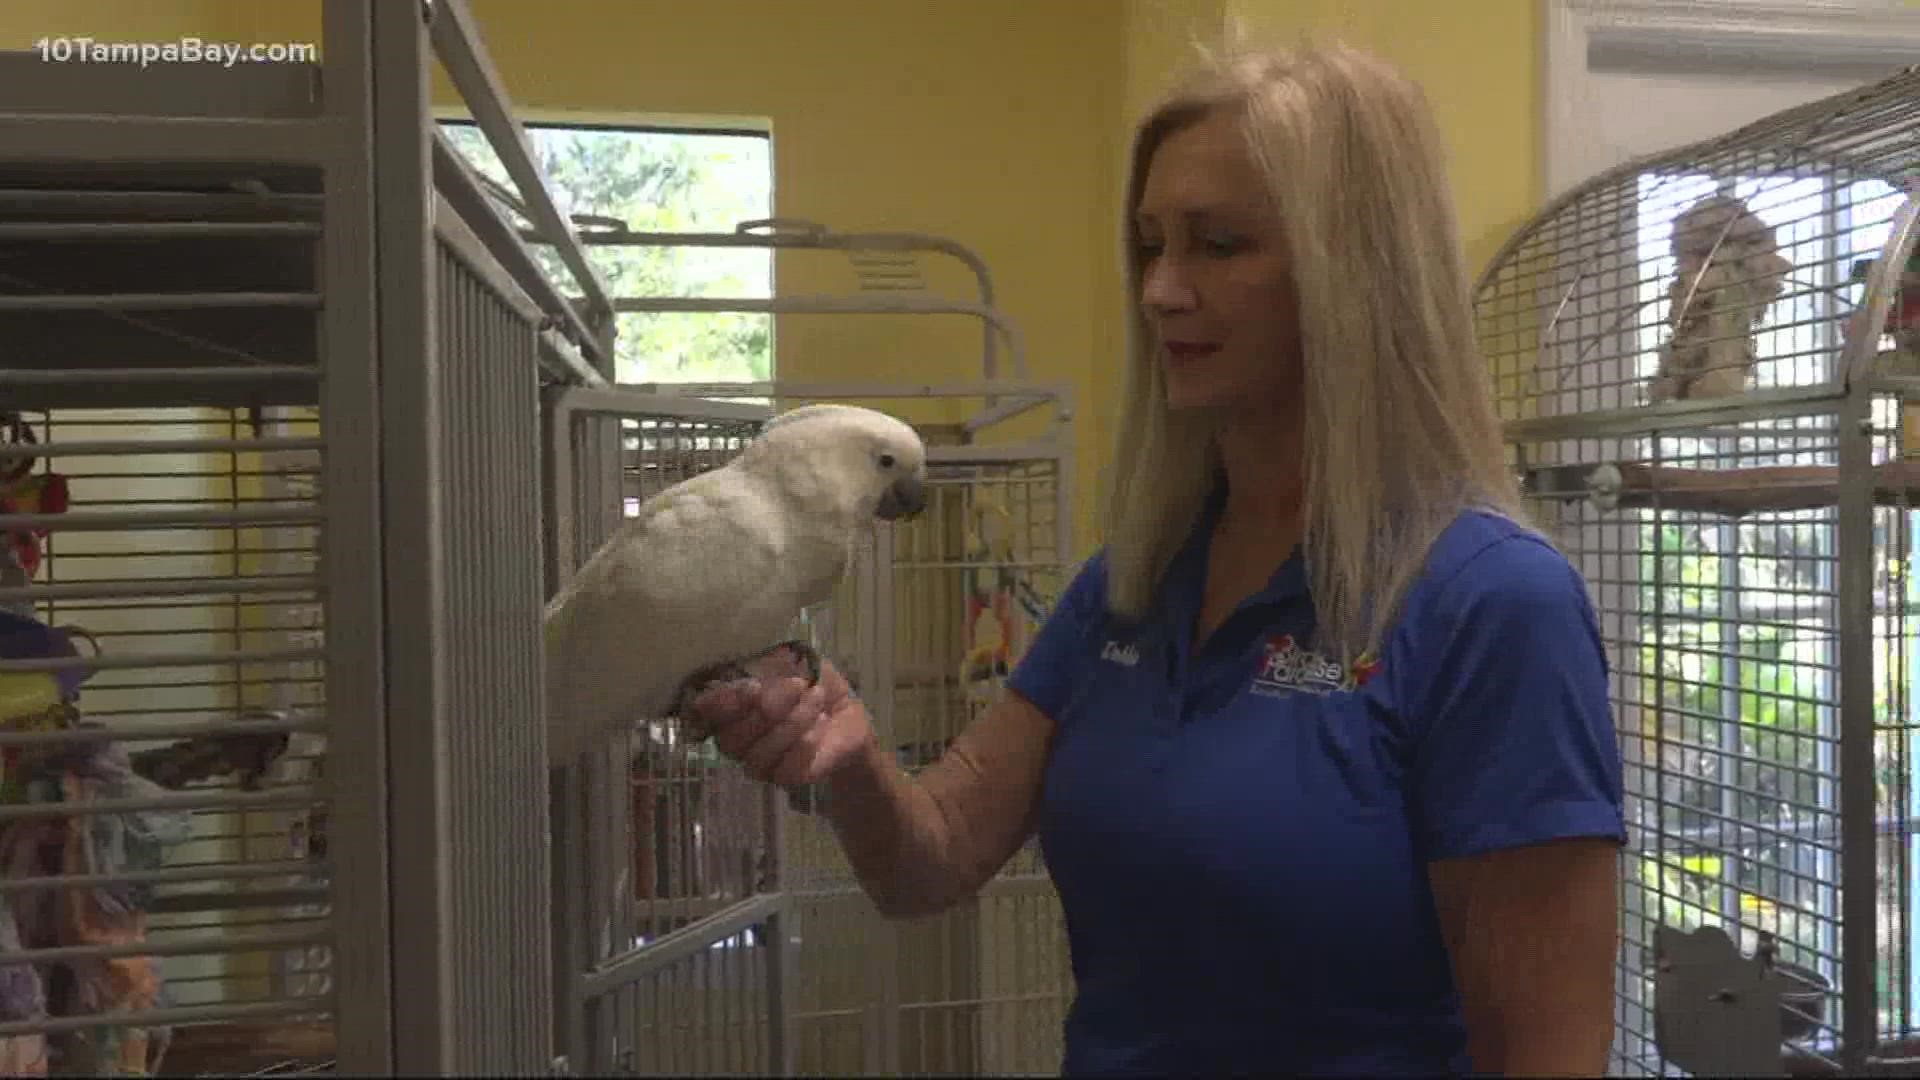 A $10,000 grant from the Community Foundation of Sarasota has gone towards expanding the Birds of Paradise Sanctuary and Rescue Center in Bradenton.